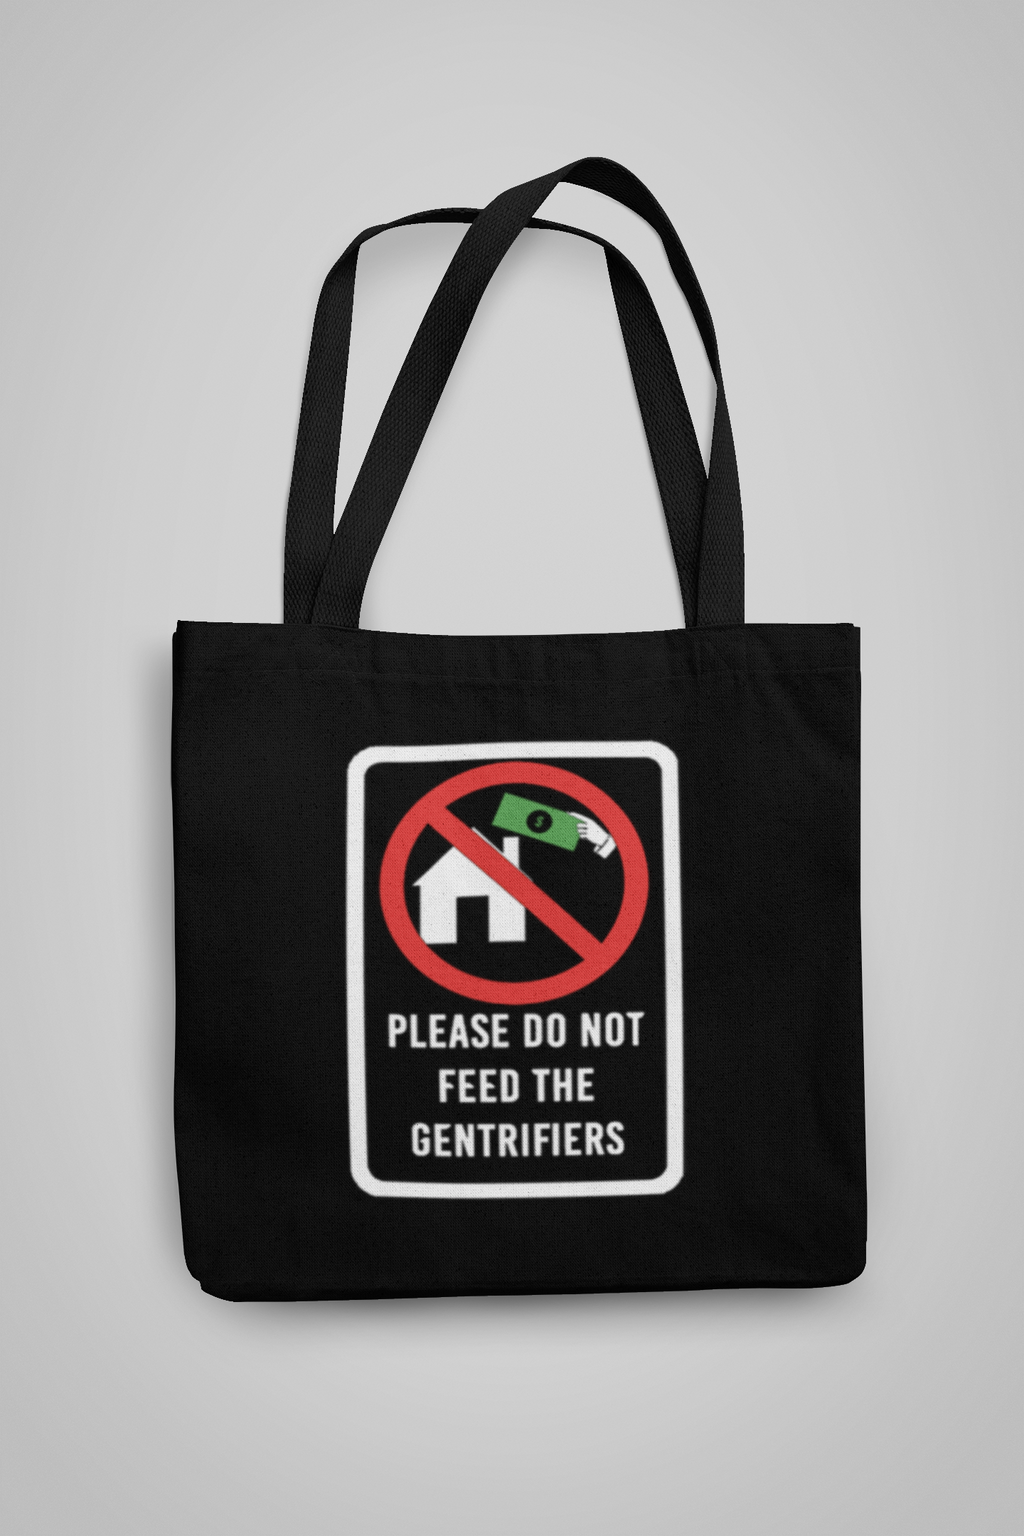 Black tote bag that says "Please Do Not Feed The Gentrifiers"